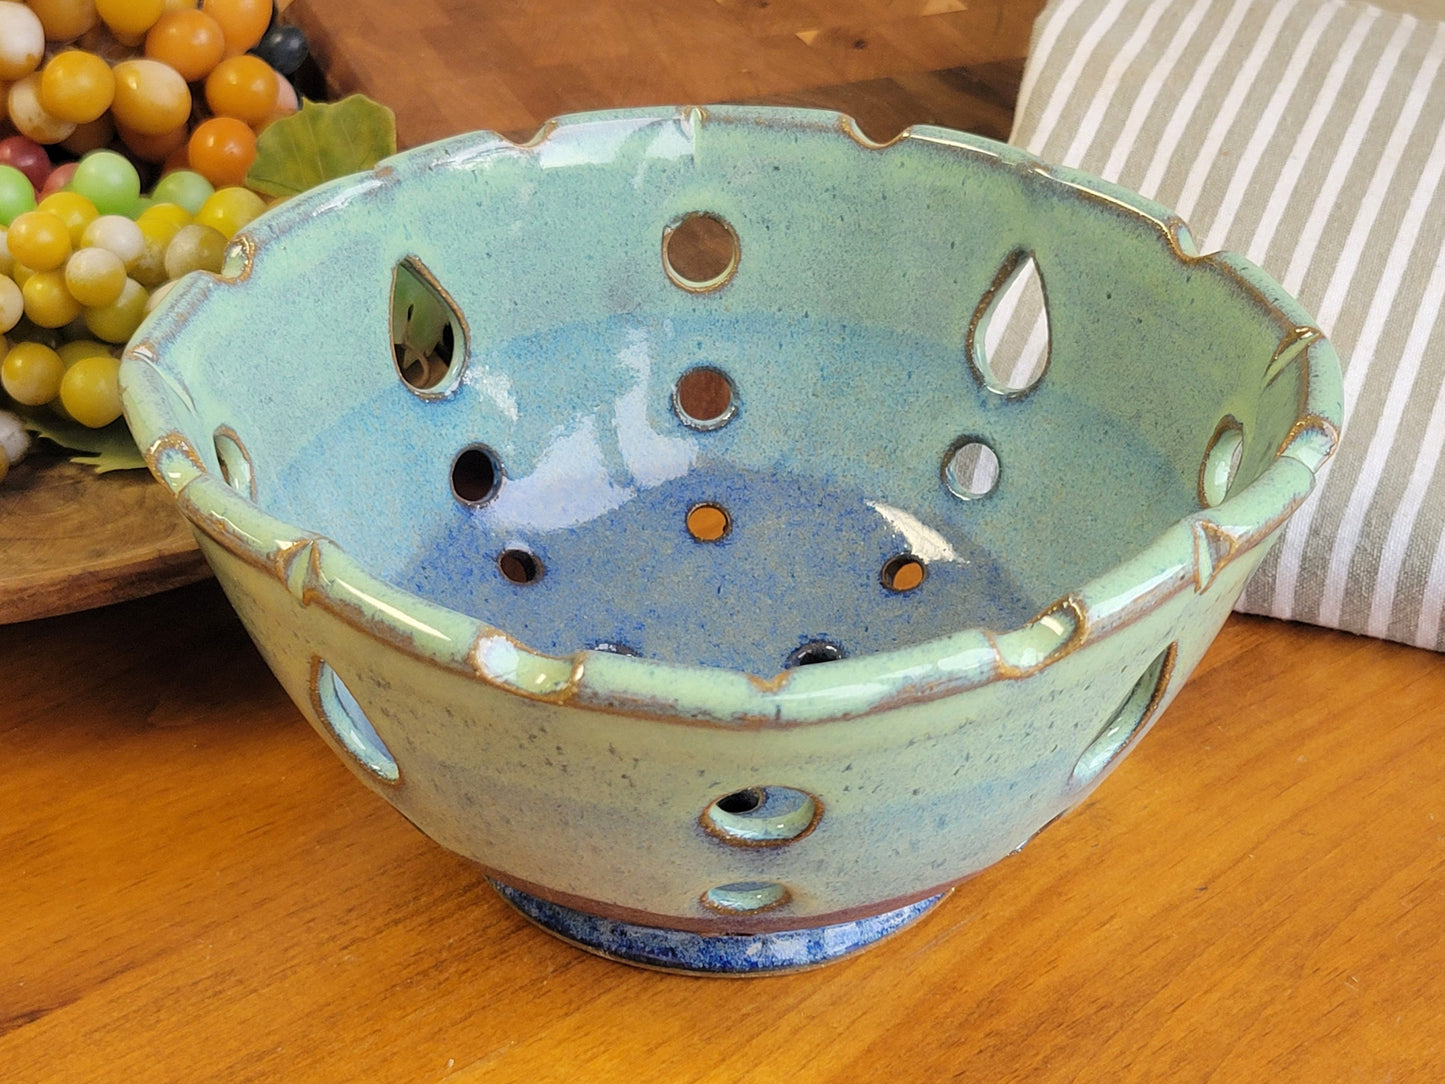 Squared Ceramic Berry Colander Rinse Bowl - Handmade Pottery Strainer Basket for Washing Fruit in Sink Green Blue